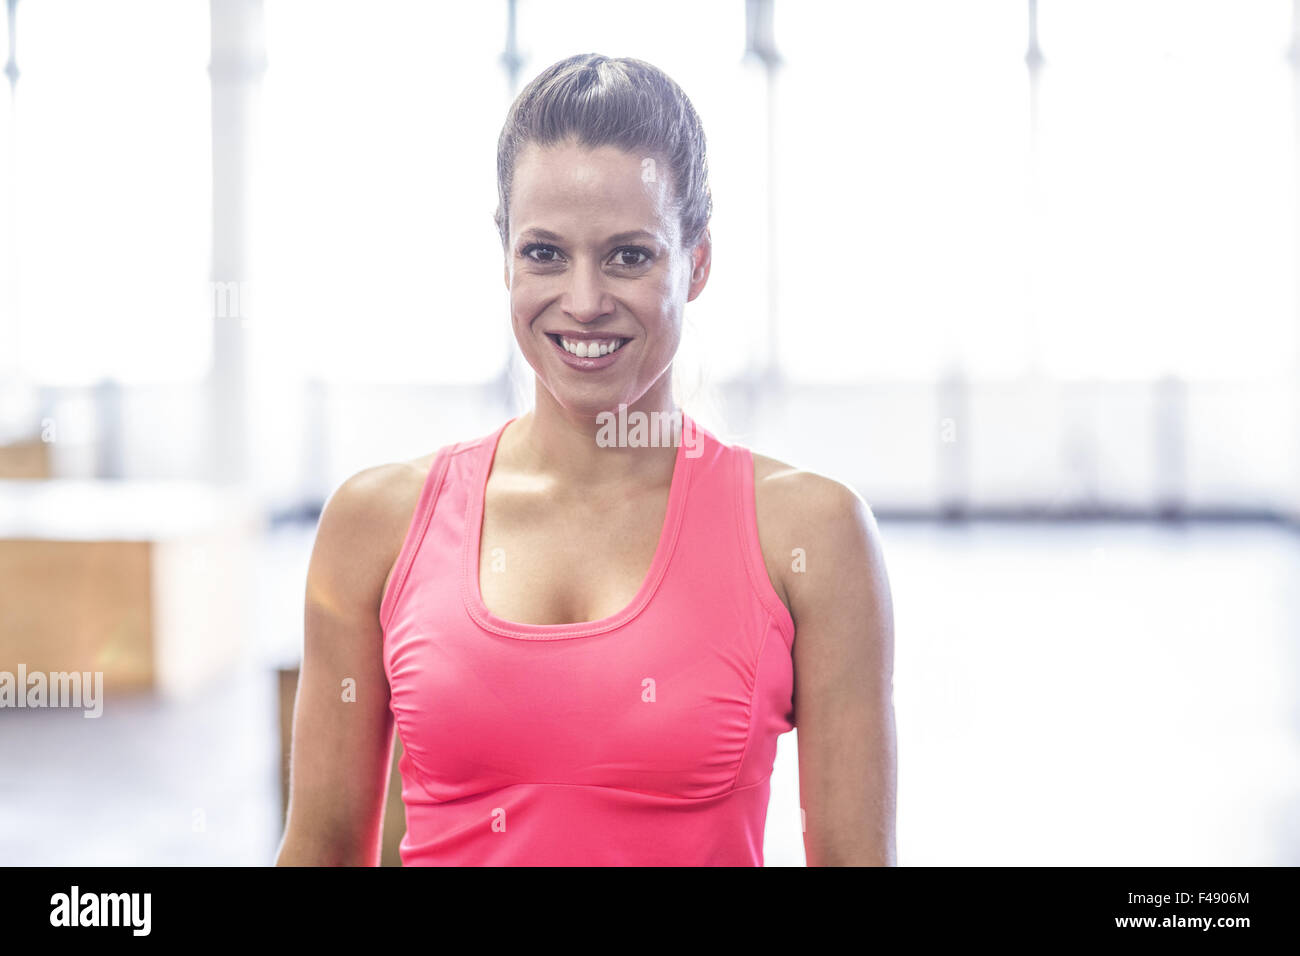 Smiling woman posing in crossfit gym Stock Photo